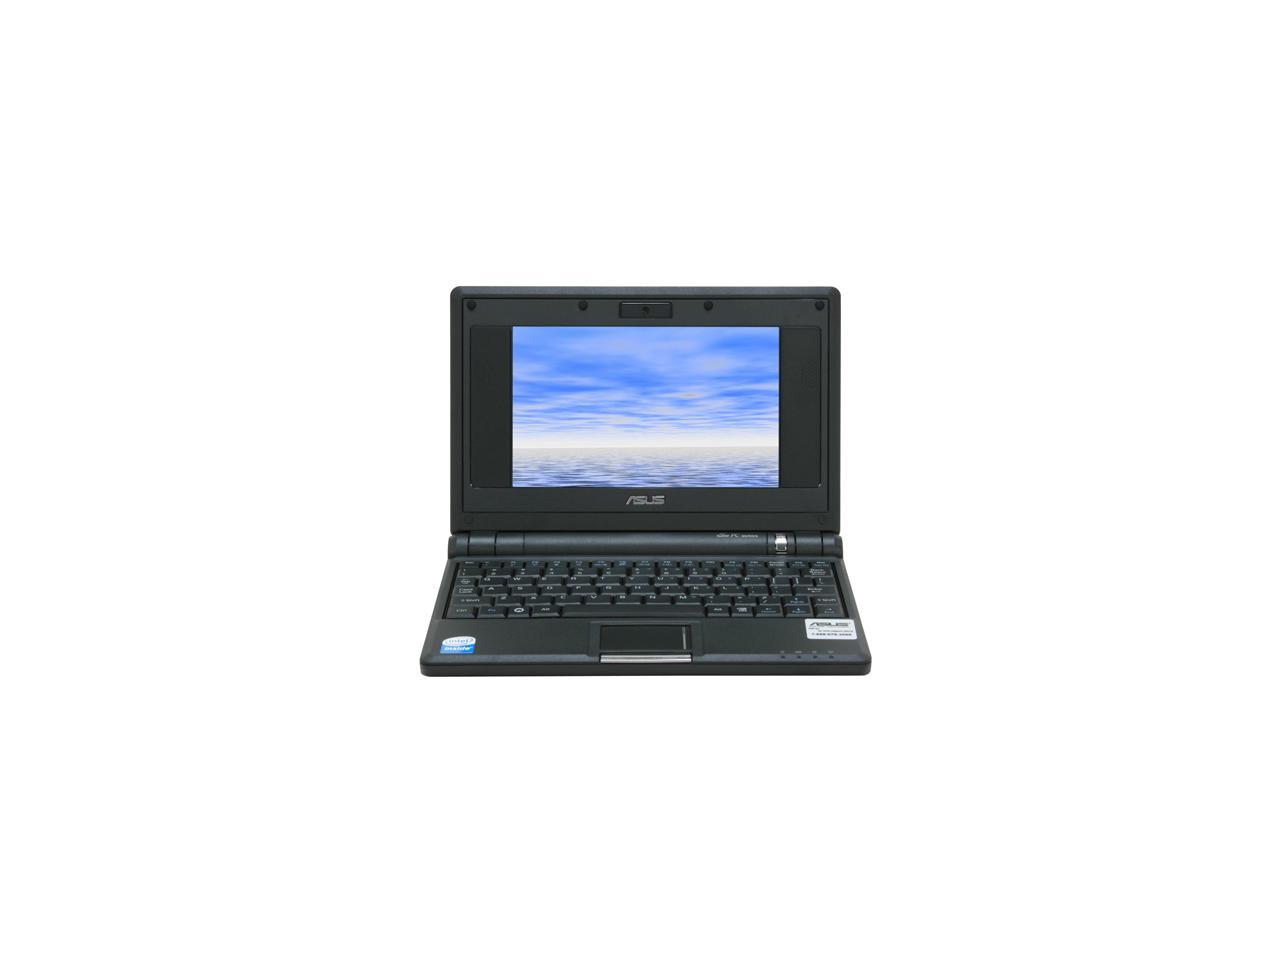 the best linux distro for eee pc 701 2015